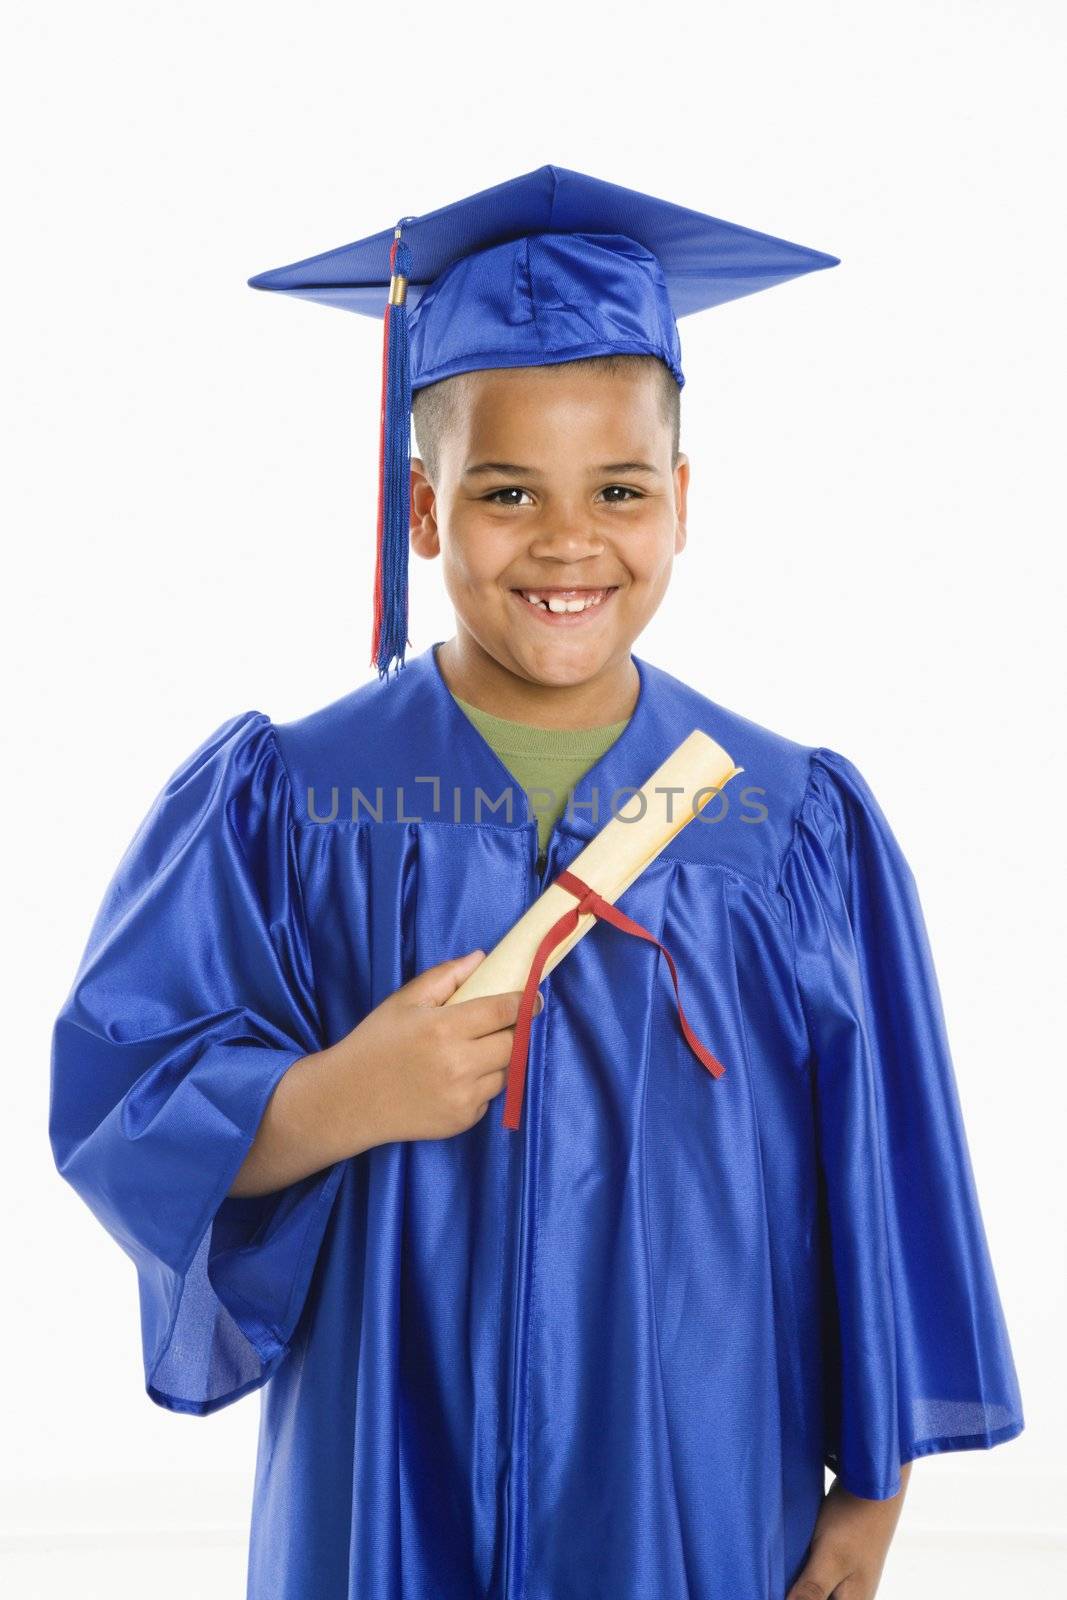 Young boy wearing blue graduation gown holding diploma.